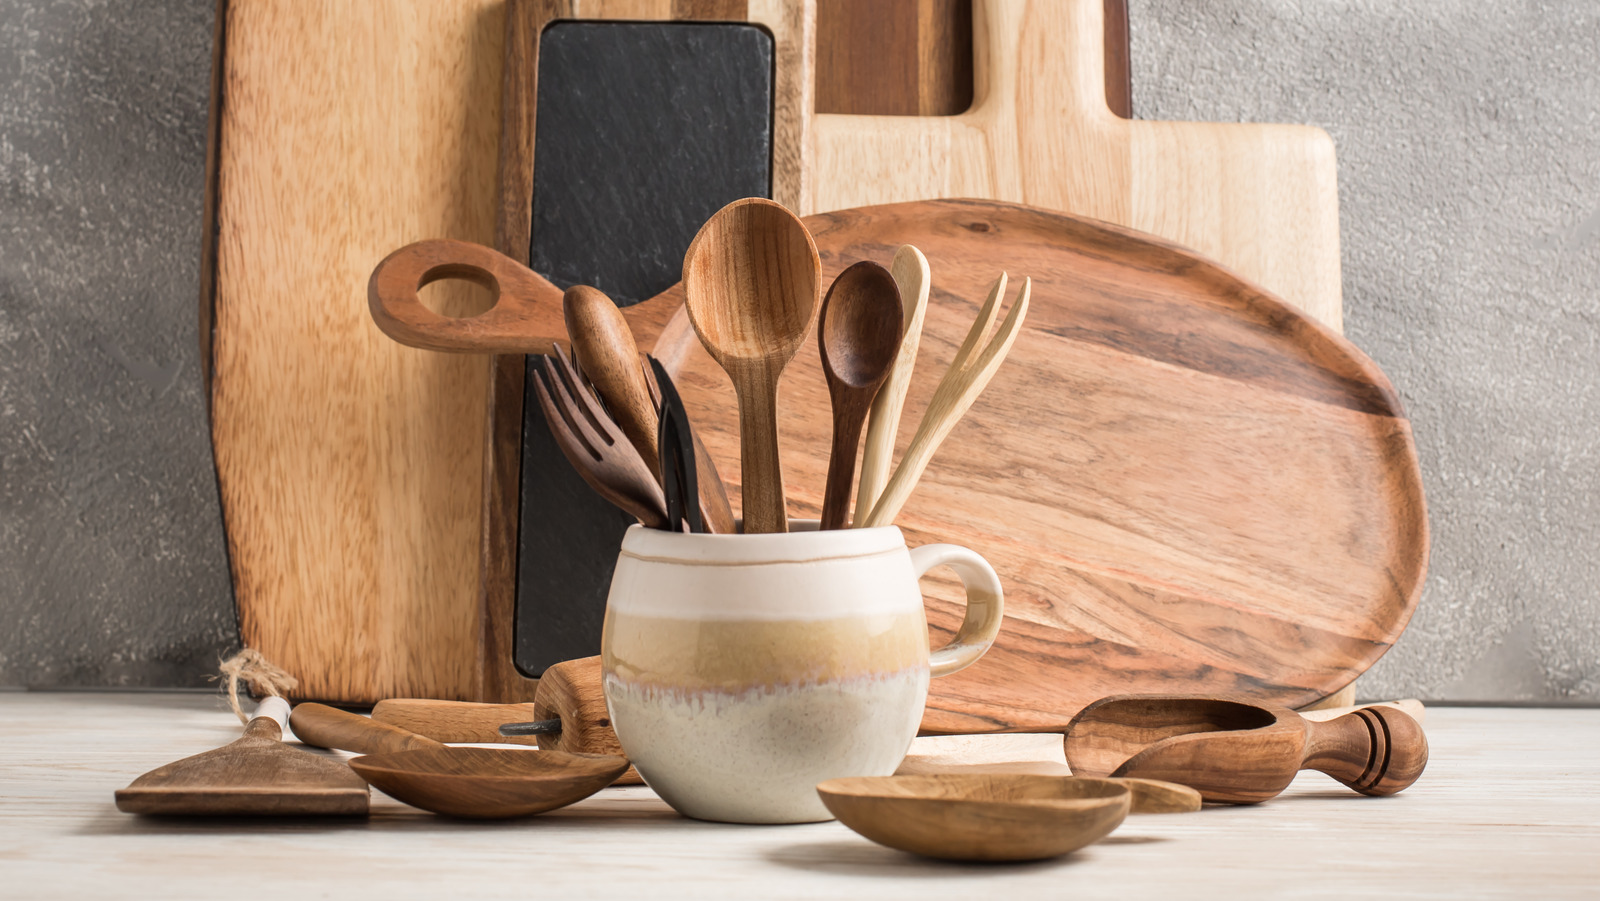 https://www.tastingtable.com/img/gallery/the-absolute-best-type-of-wood-for-cooking-utensils/l-intro-1652378841.jpg